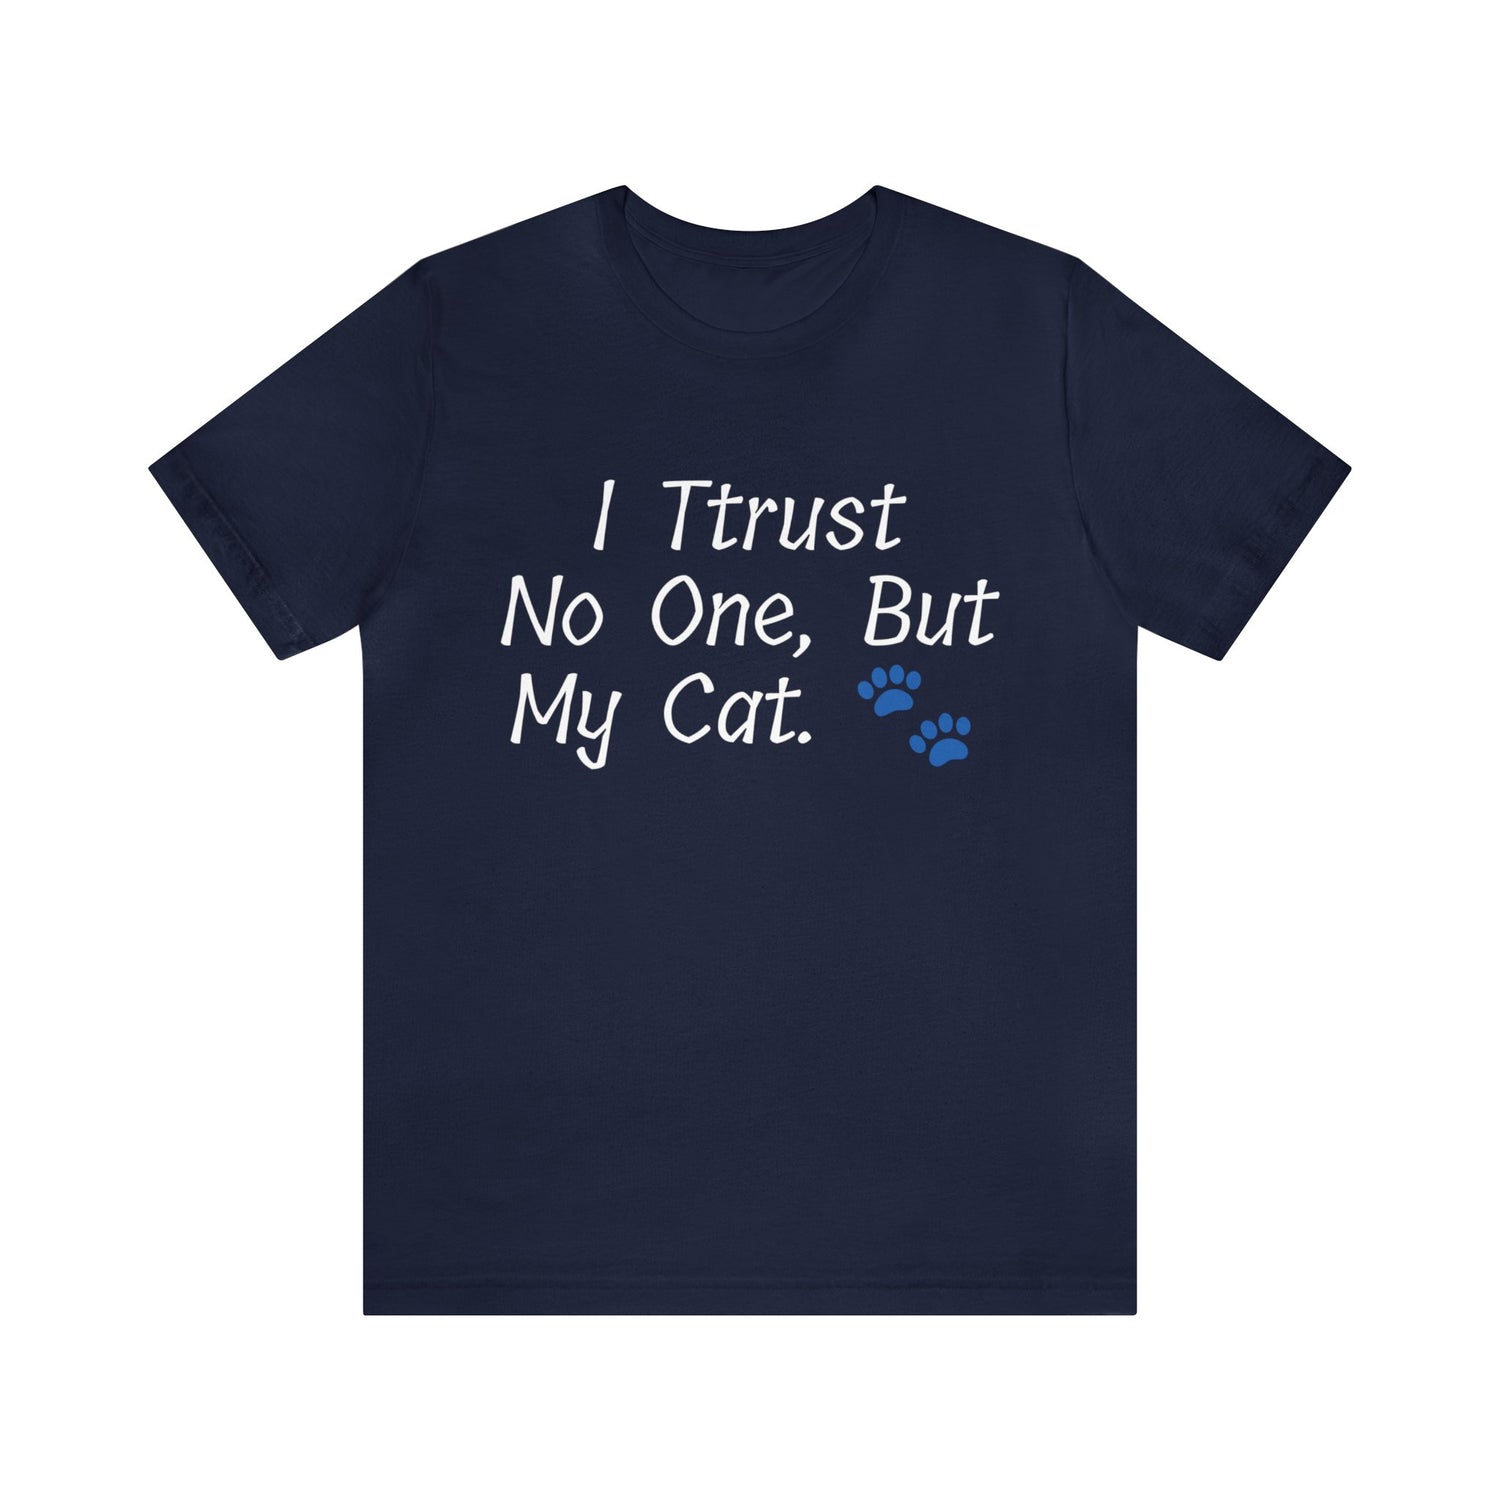 Navy T-Shirt Tshirt Design Gift for Friend and Family Short Sleeved Shirt For Cat Lovers Gift Petrova Designs